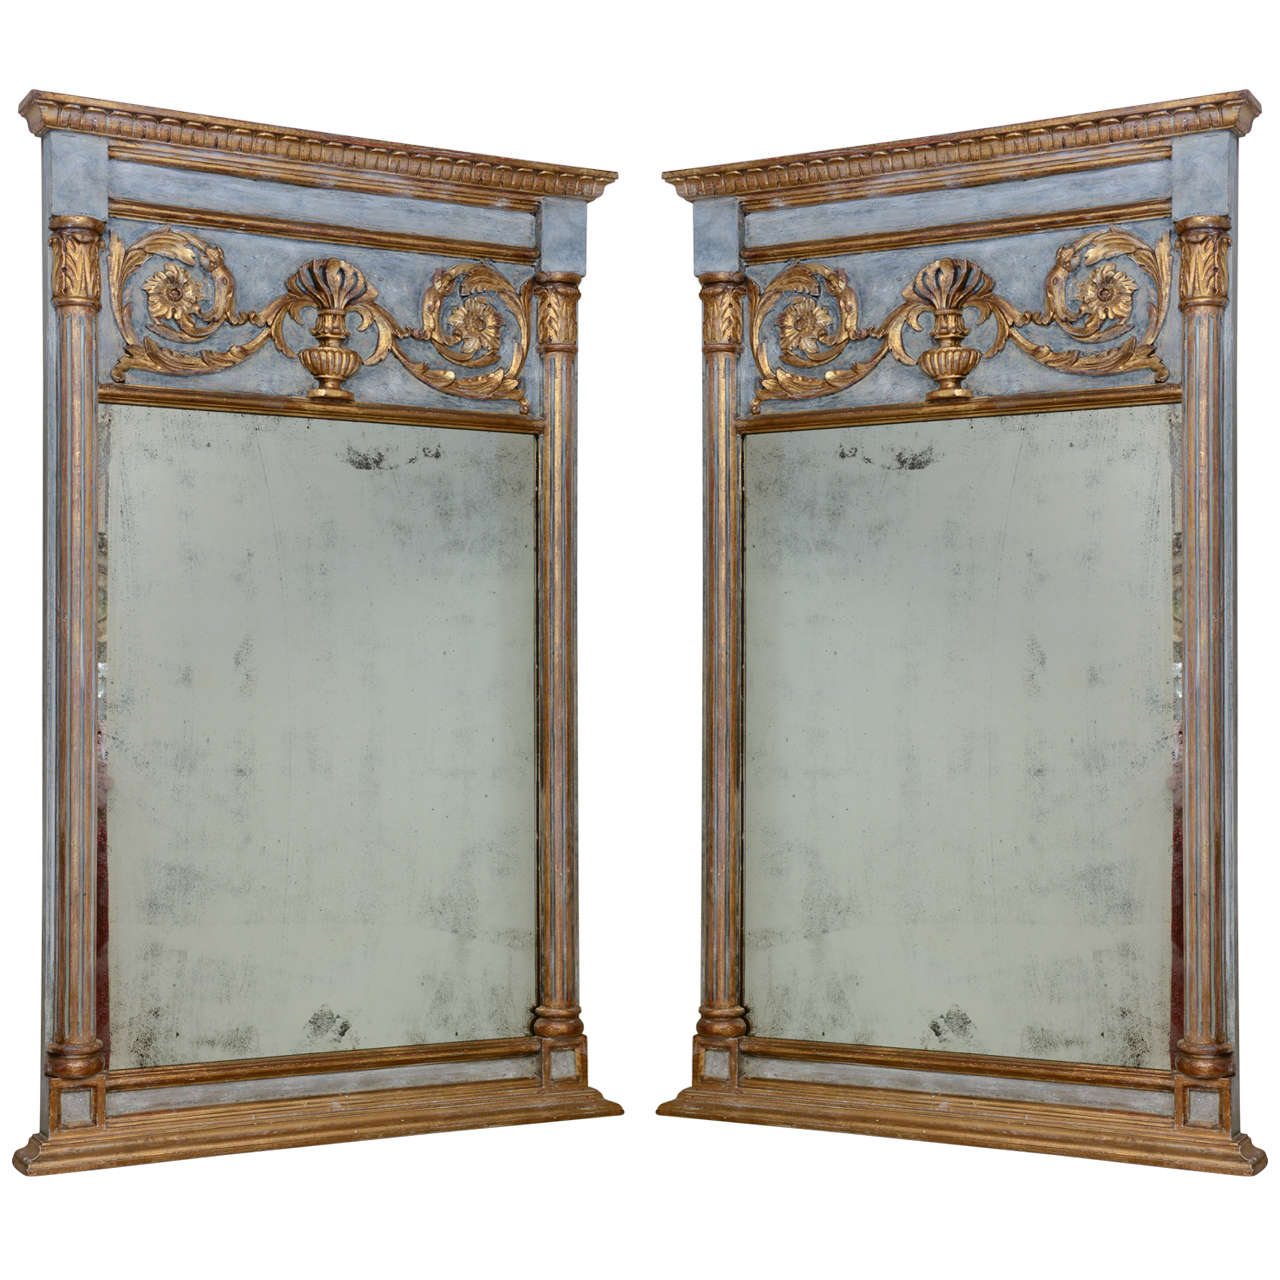 Pair of Painted and ParcelGilt Trumeau Mirrors